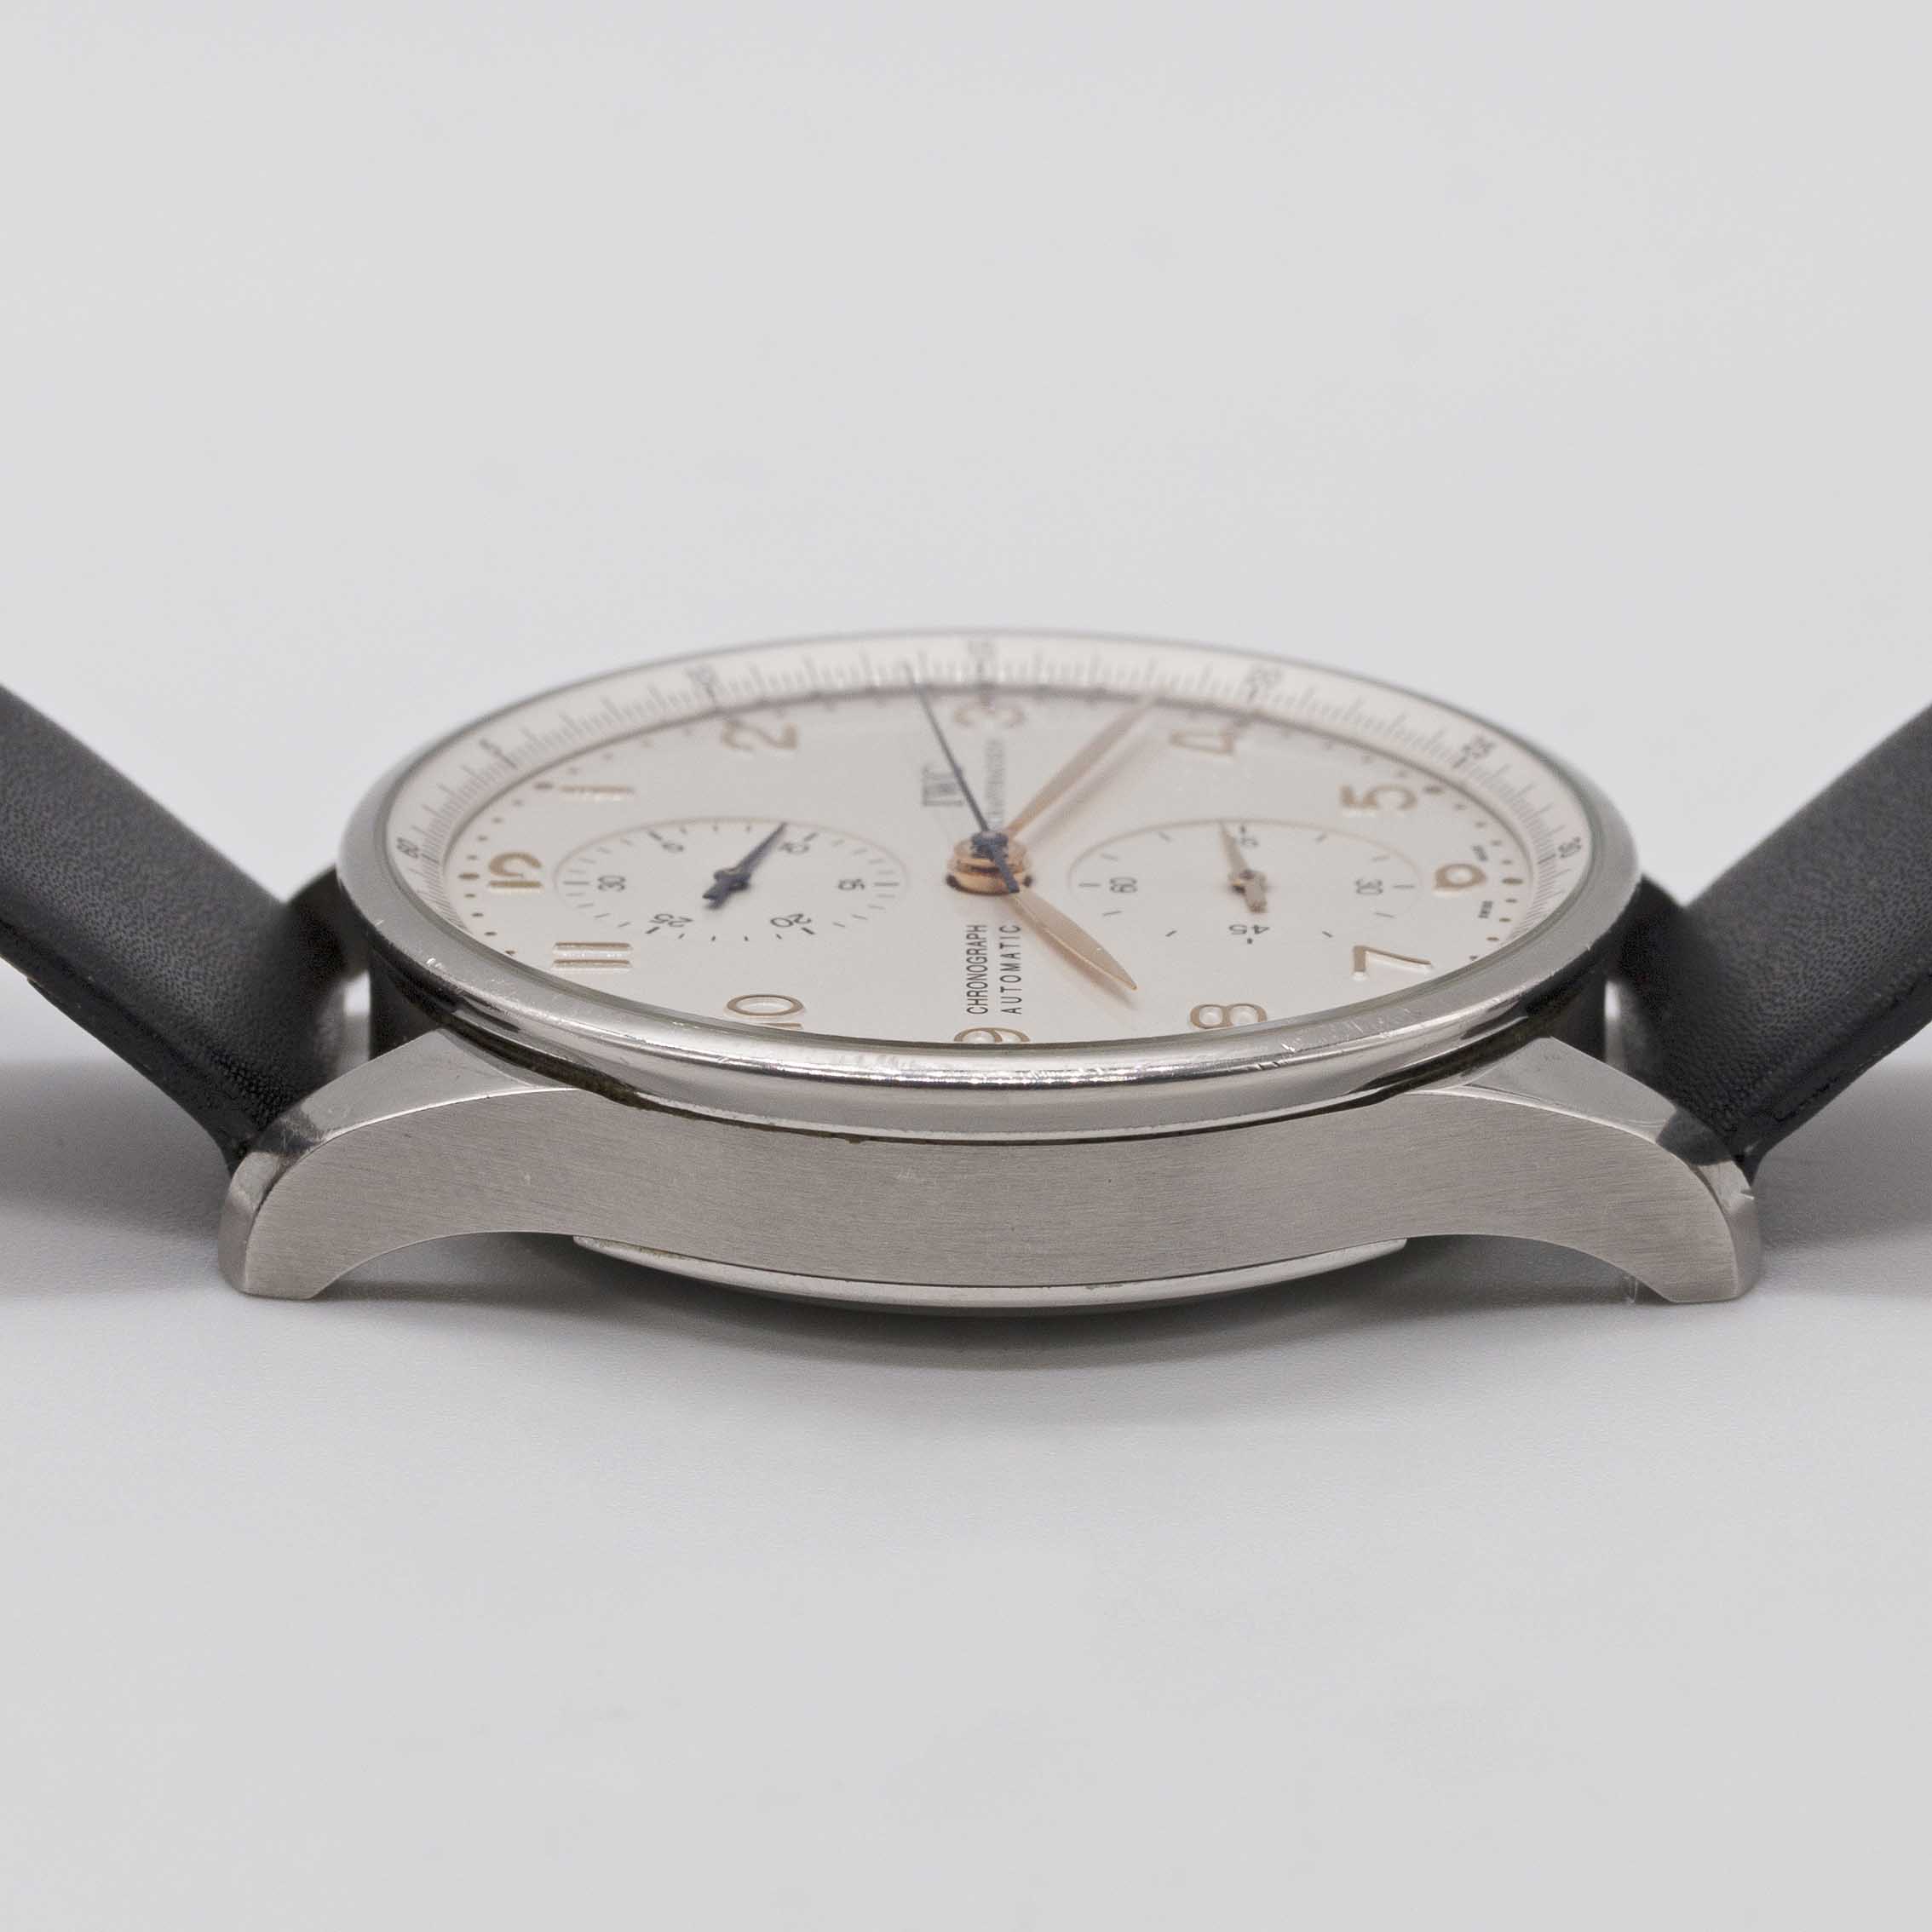 A GENTLEMAN'S STAINLESS STEEL IWC PORTUGUESE AUTOMATIC CHRONOGRAPH WRIST WATCH DATED 2007, REF. - Image 7 of 8